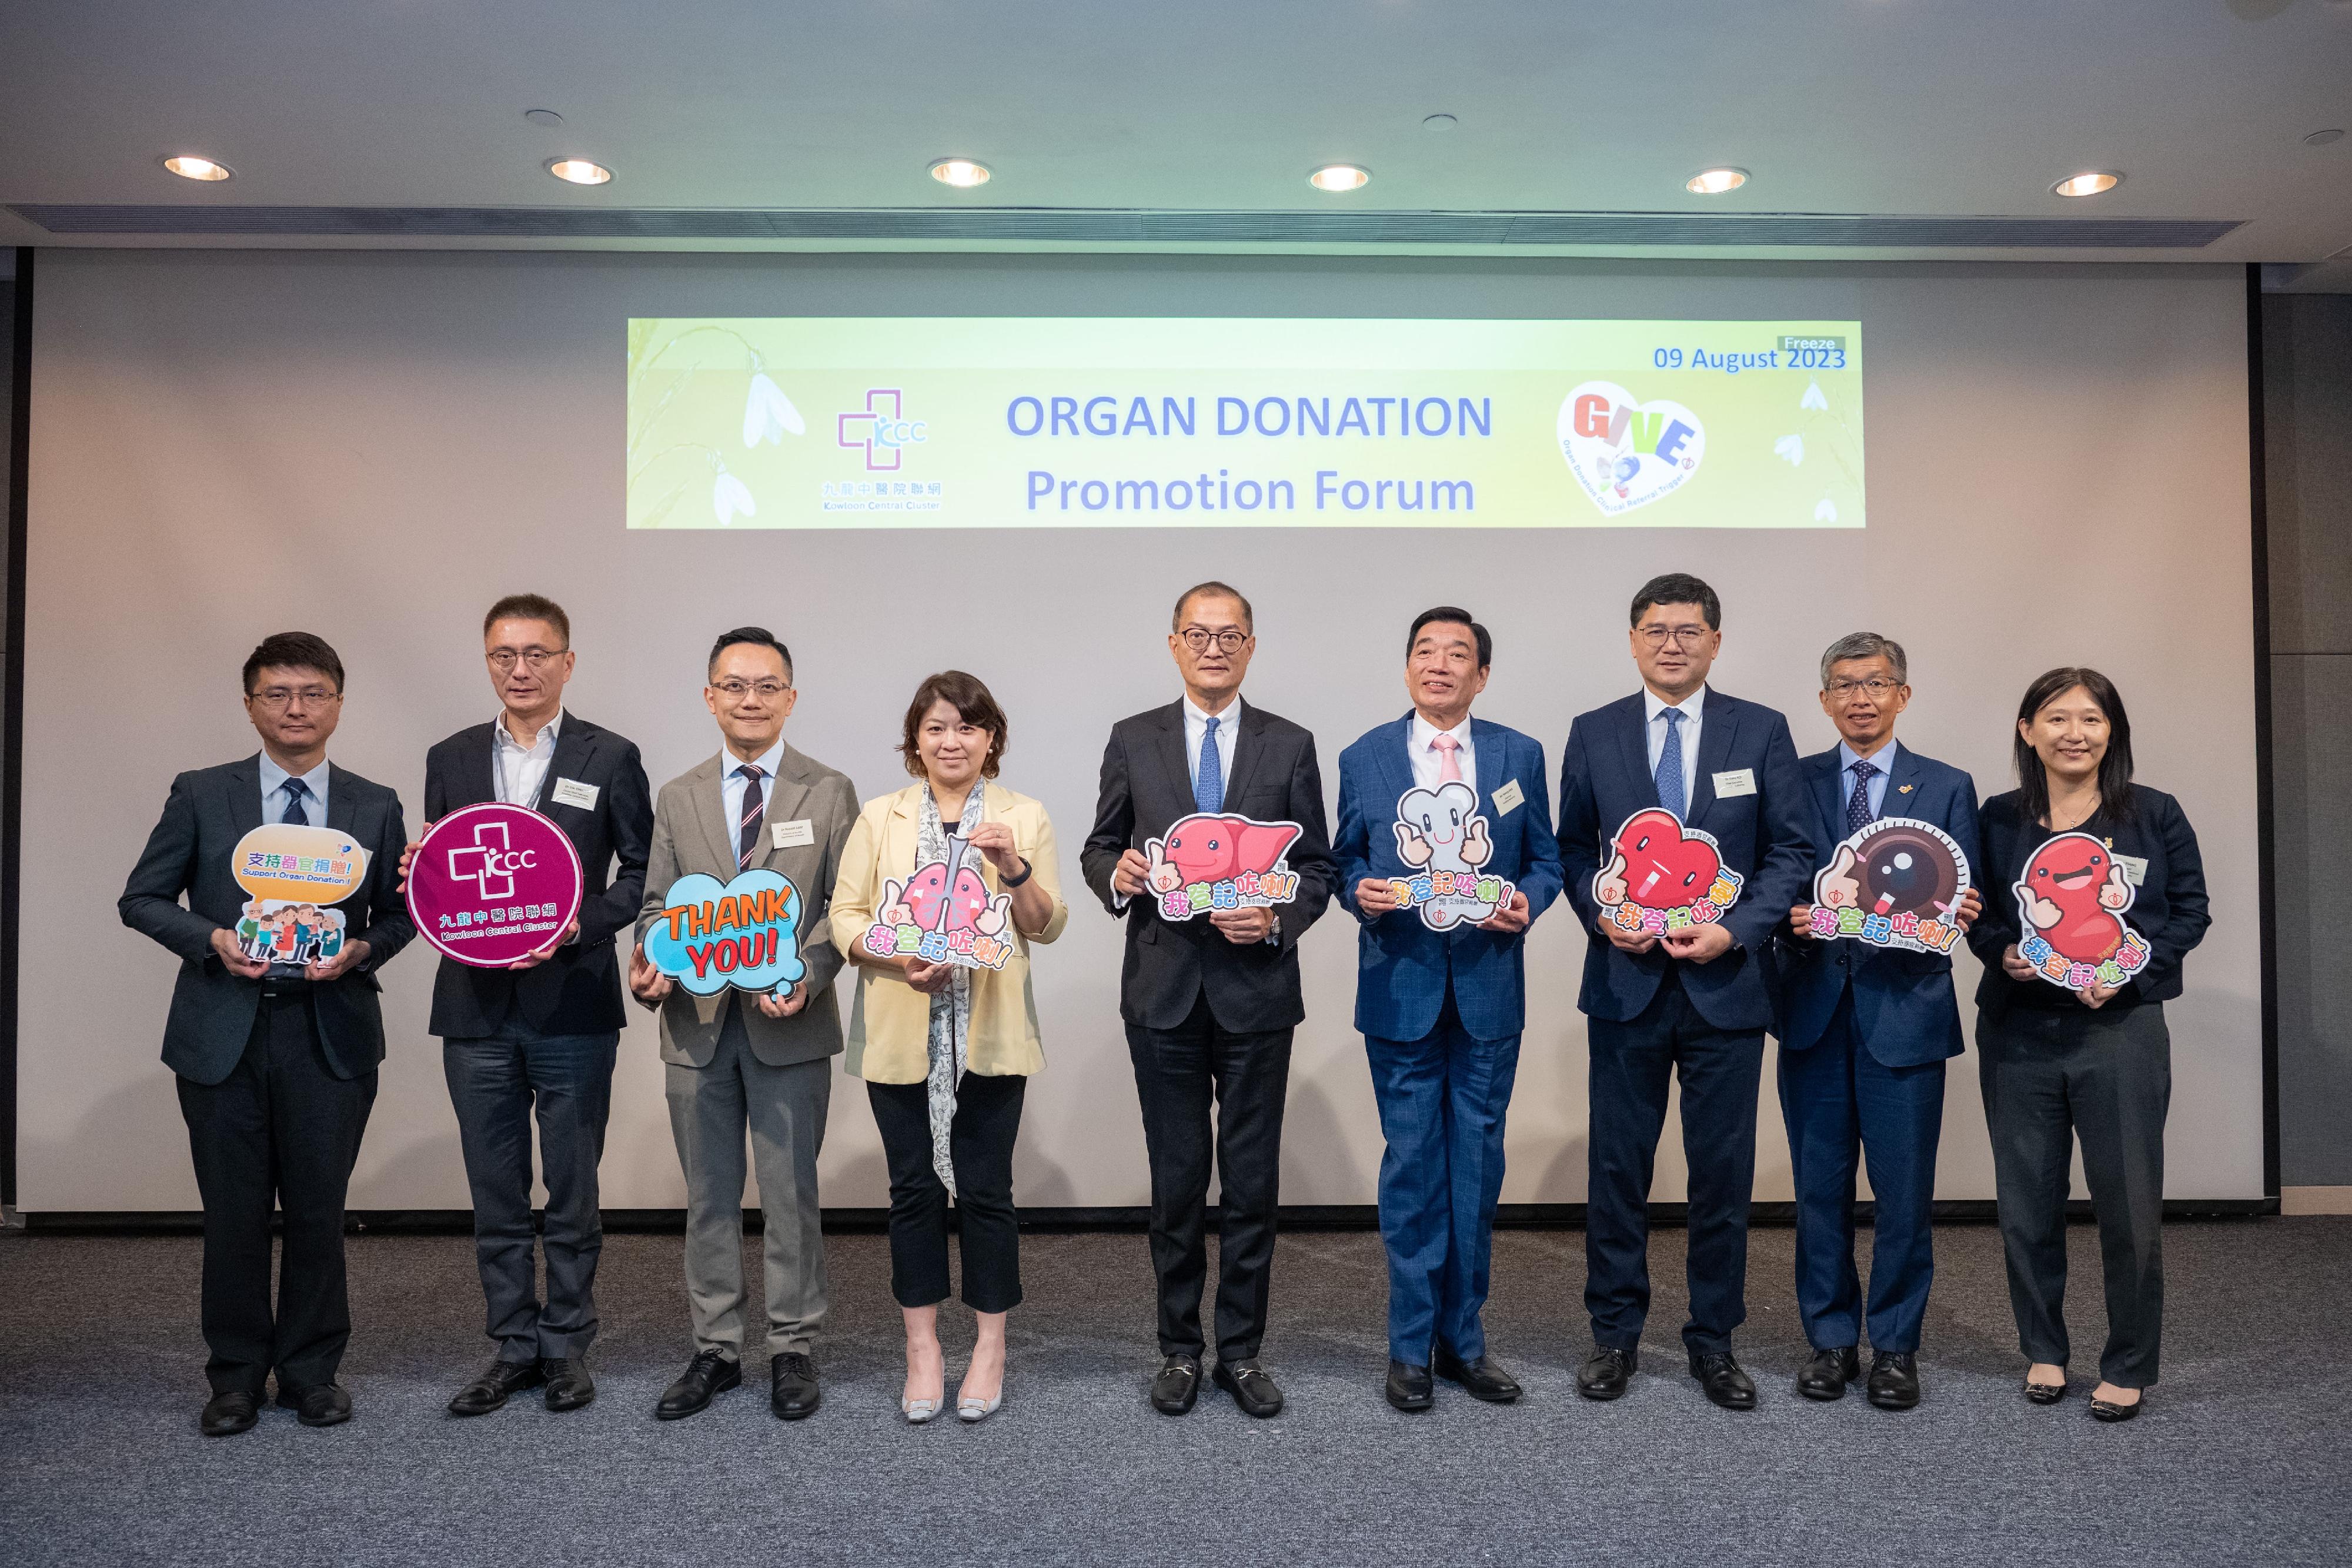 The Secretary for Health, Professor Lo Chung-mau (centre); the Under Secretary for Health, Dr Libby Lee (fourth left); the Director of Health, Dr Ronald Lam (third left); the Chairman of the Hospital Authority (HA), Mr Henry Fan (fourth right); and the Chief Executive of the HA, Dr Tony Ko (third right), attend the Organ Donation Promotion Forum organised by the Kowloon Central Cluster of the HA today (August 9).